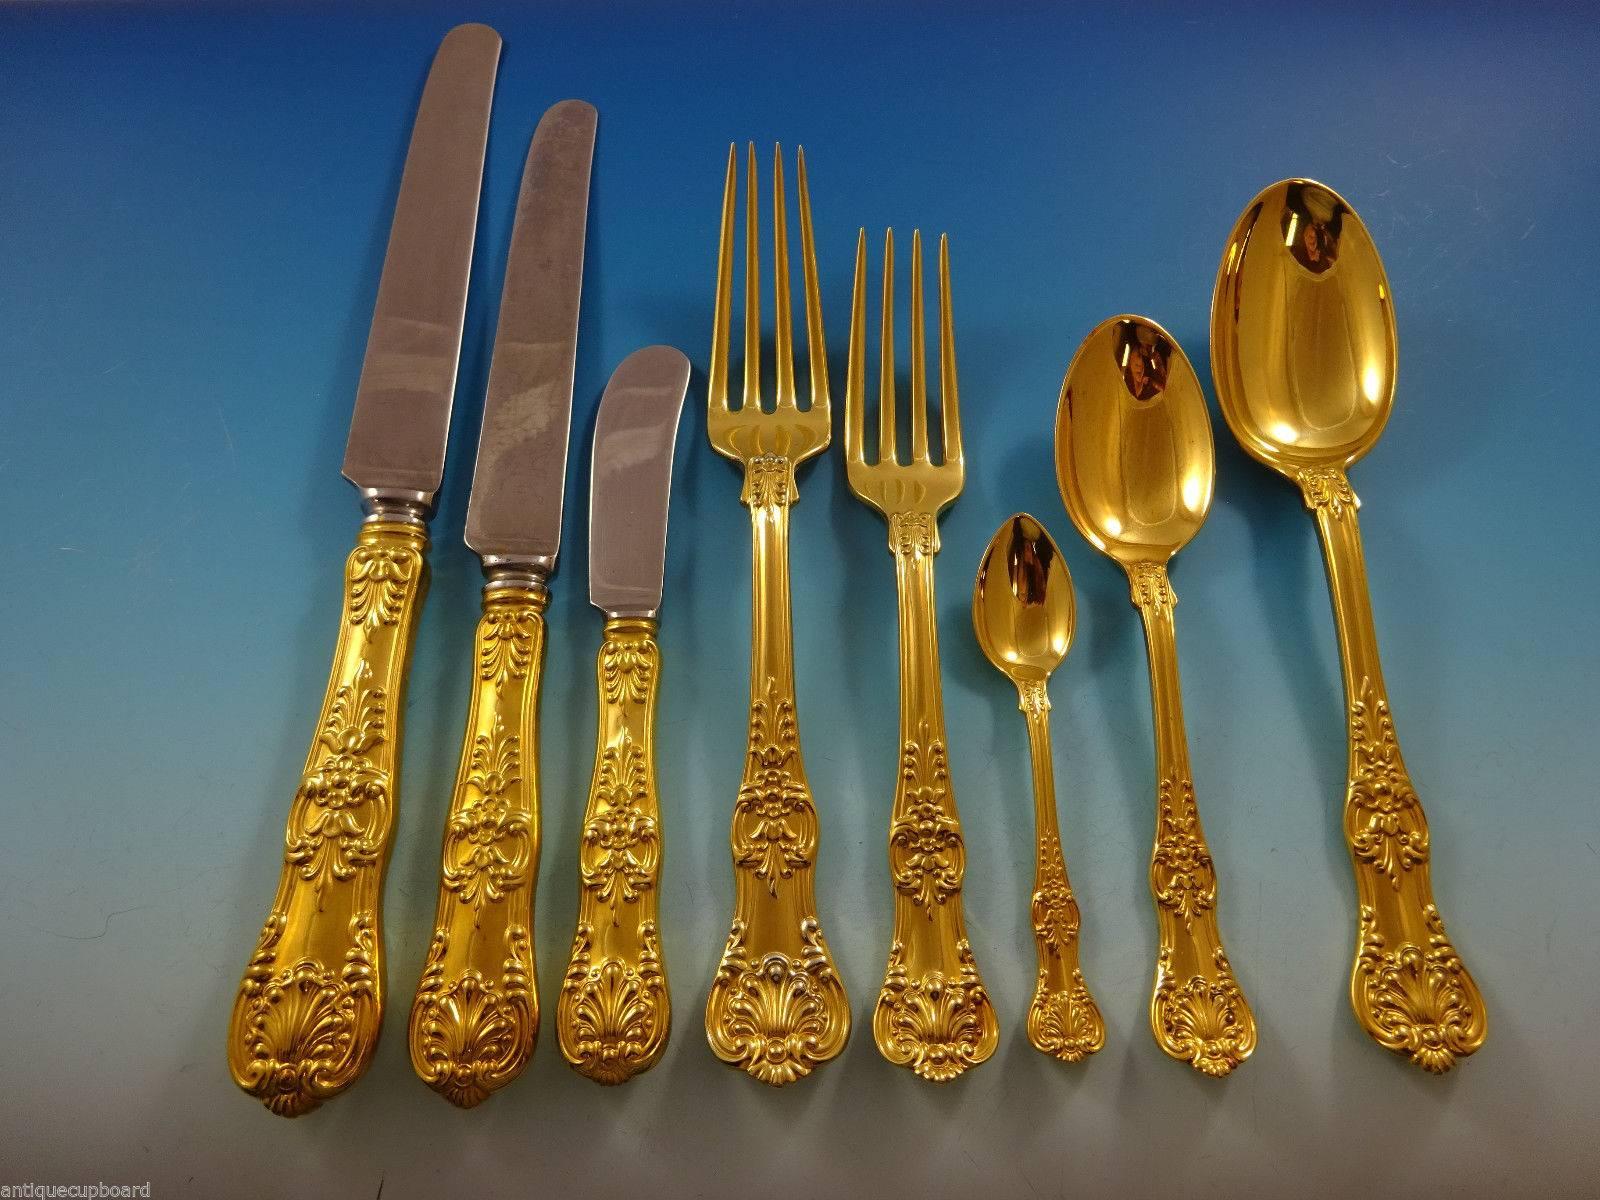 English King (circa 1885).

Patterns similar to our English King were first used in France and England late in the 18th century and have remained among the most popular styles for flatware today, in both Europe and America. Tiffany & Co. first